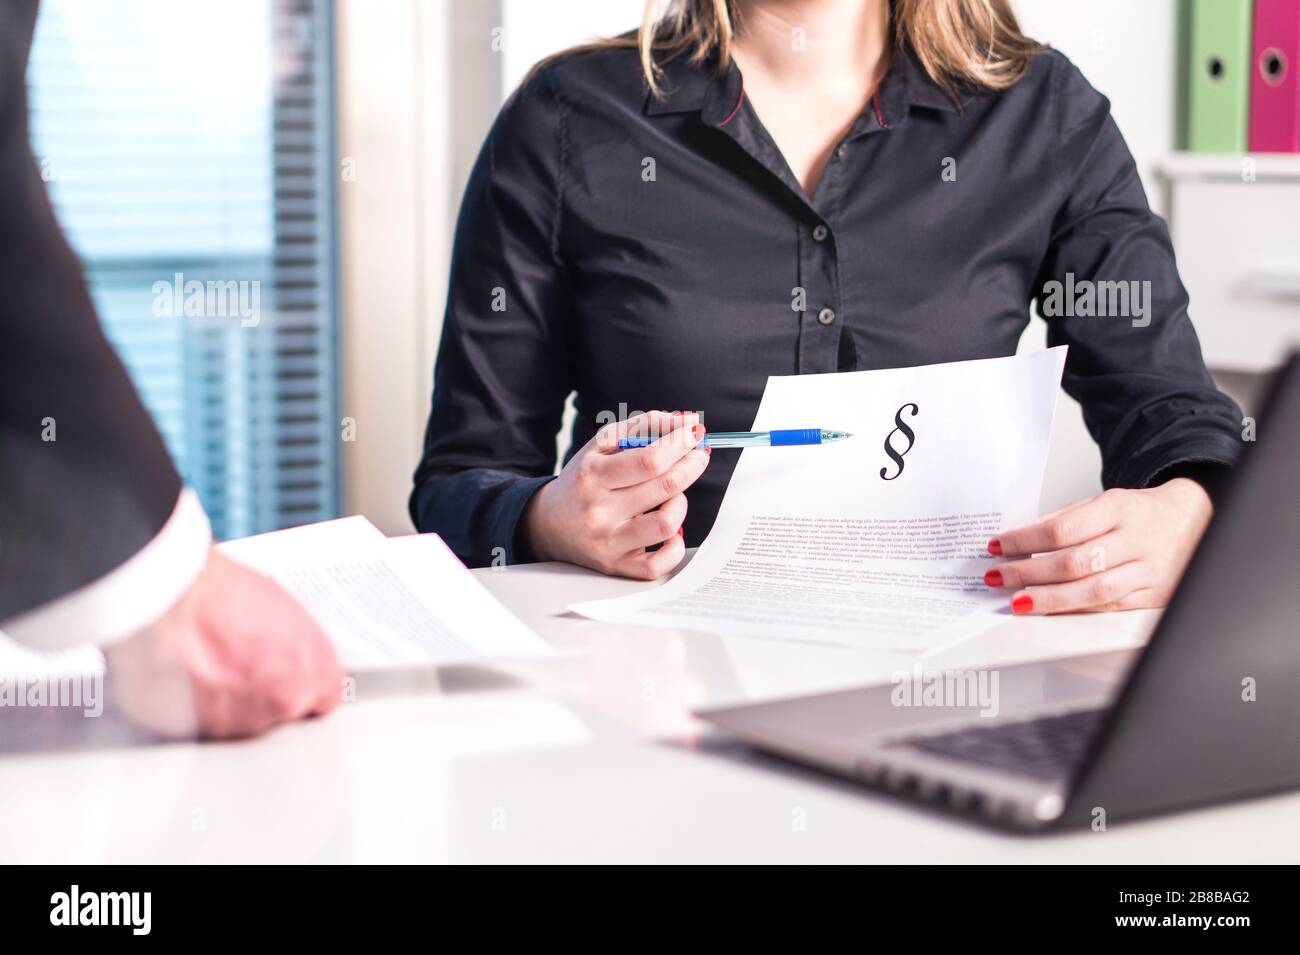 Female lawyer and attorney pointing a legal document in meeting with colleague. Team and company working. Teamwork in law firm. Stock Photo